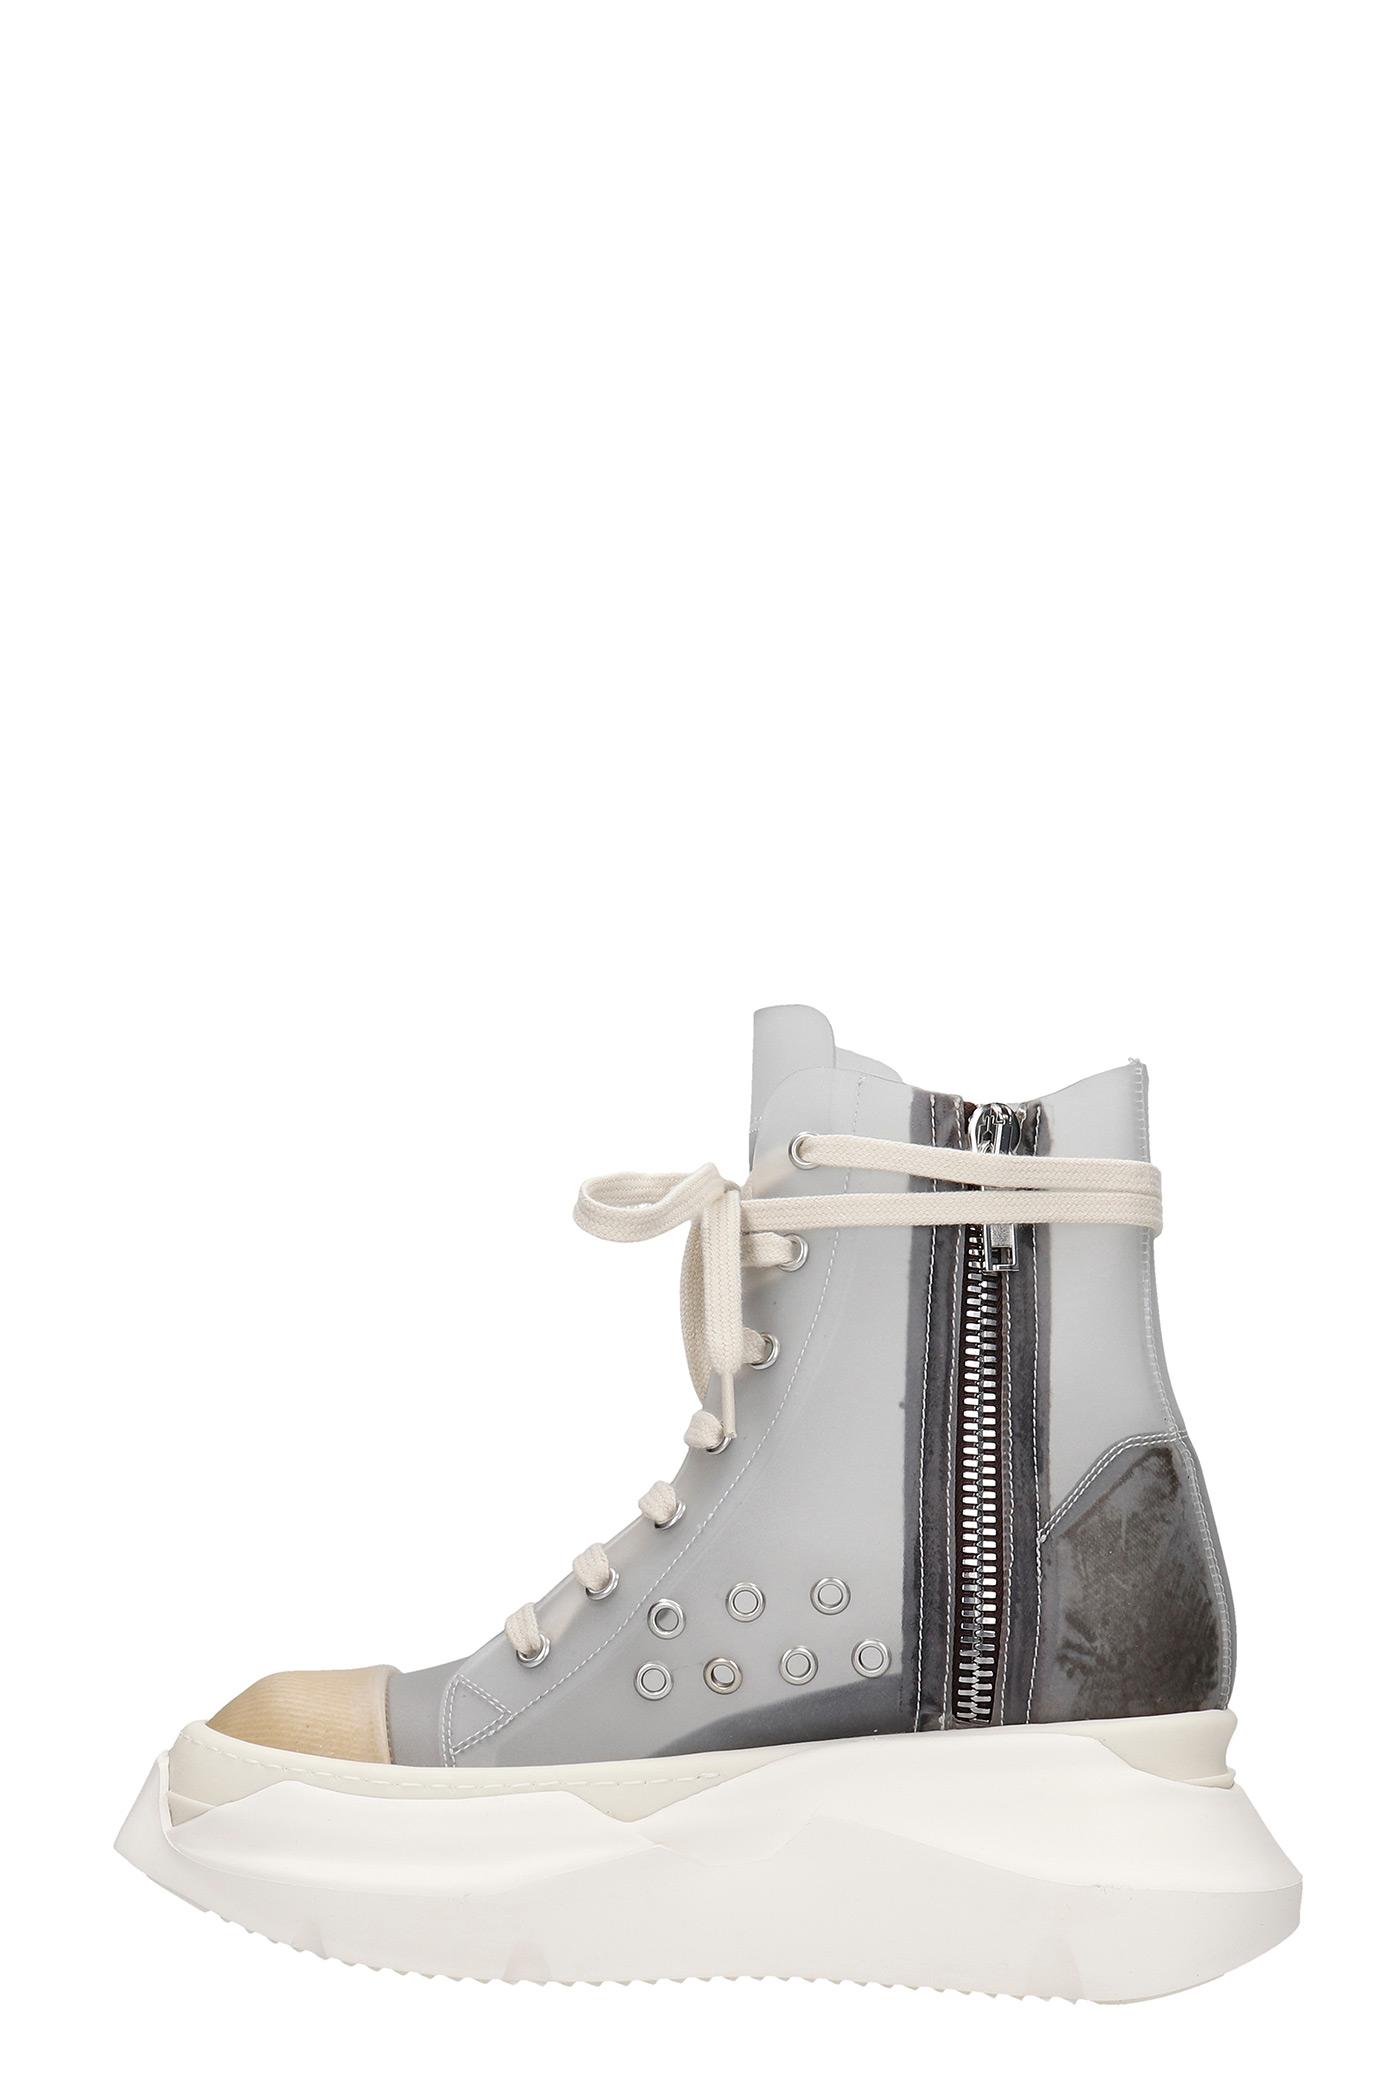 Rick Owens DRKSHDW Abstract Sneakers In Transparent Pvc in Gray | Lyst